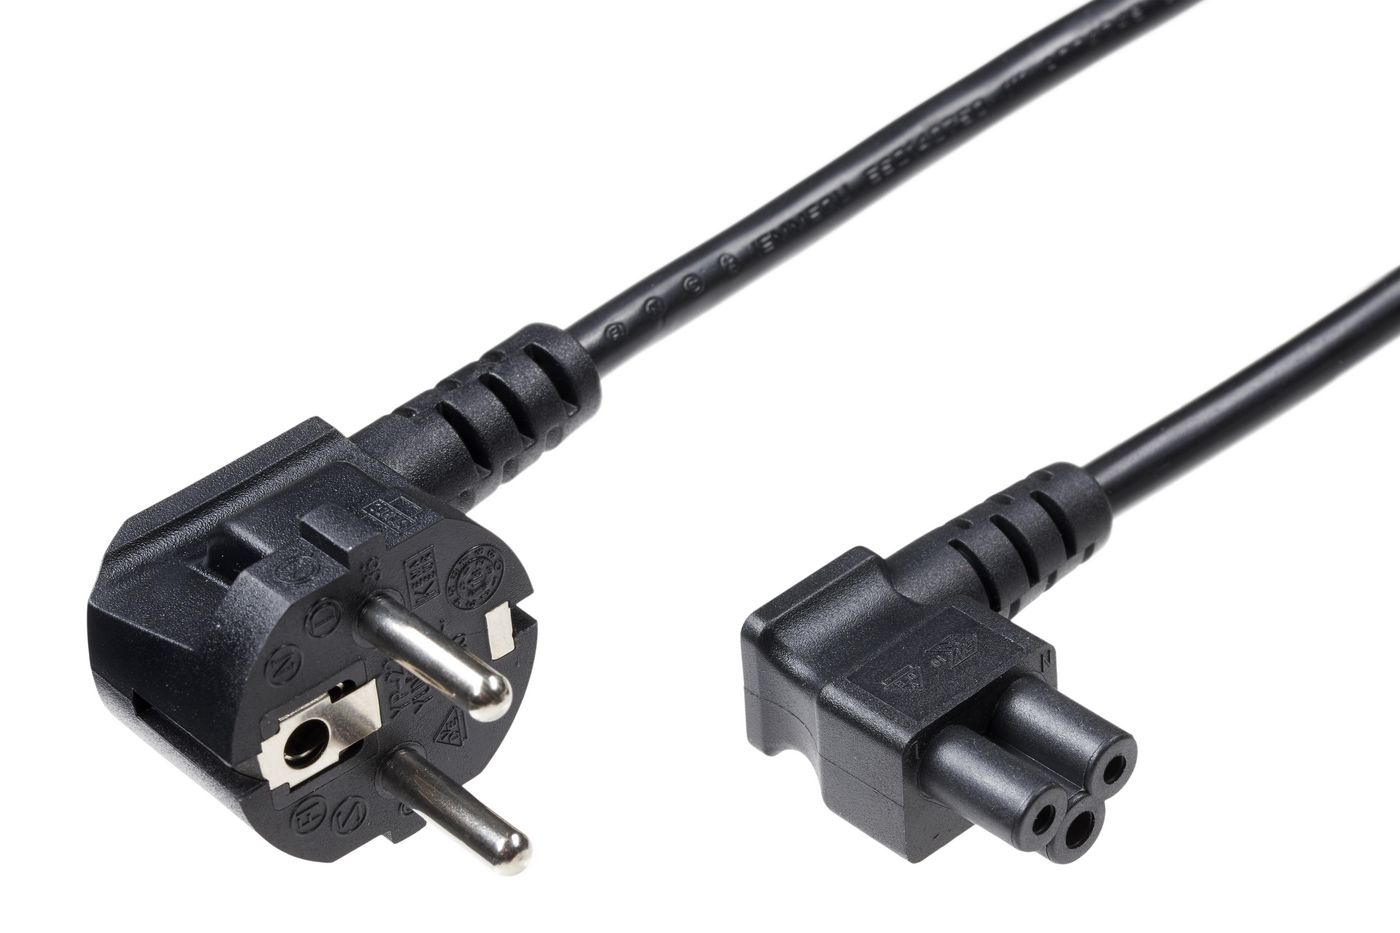 Power Cord Notebook 1.8m Blackwith Angled Cee7/7-c5